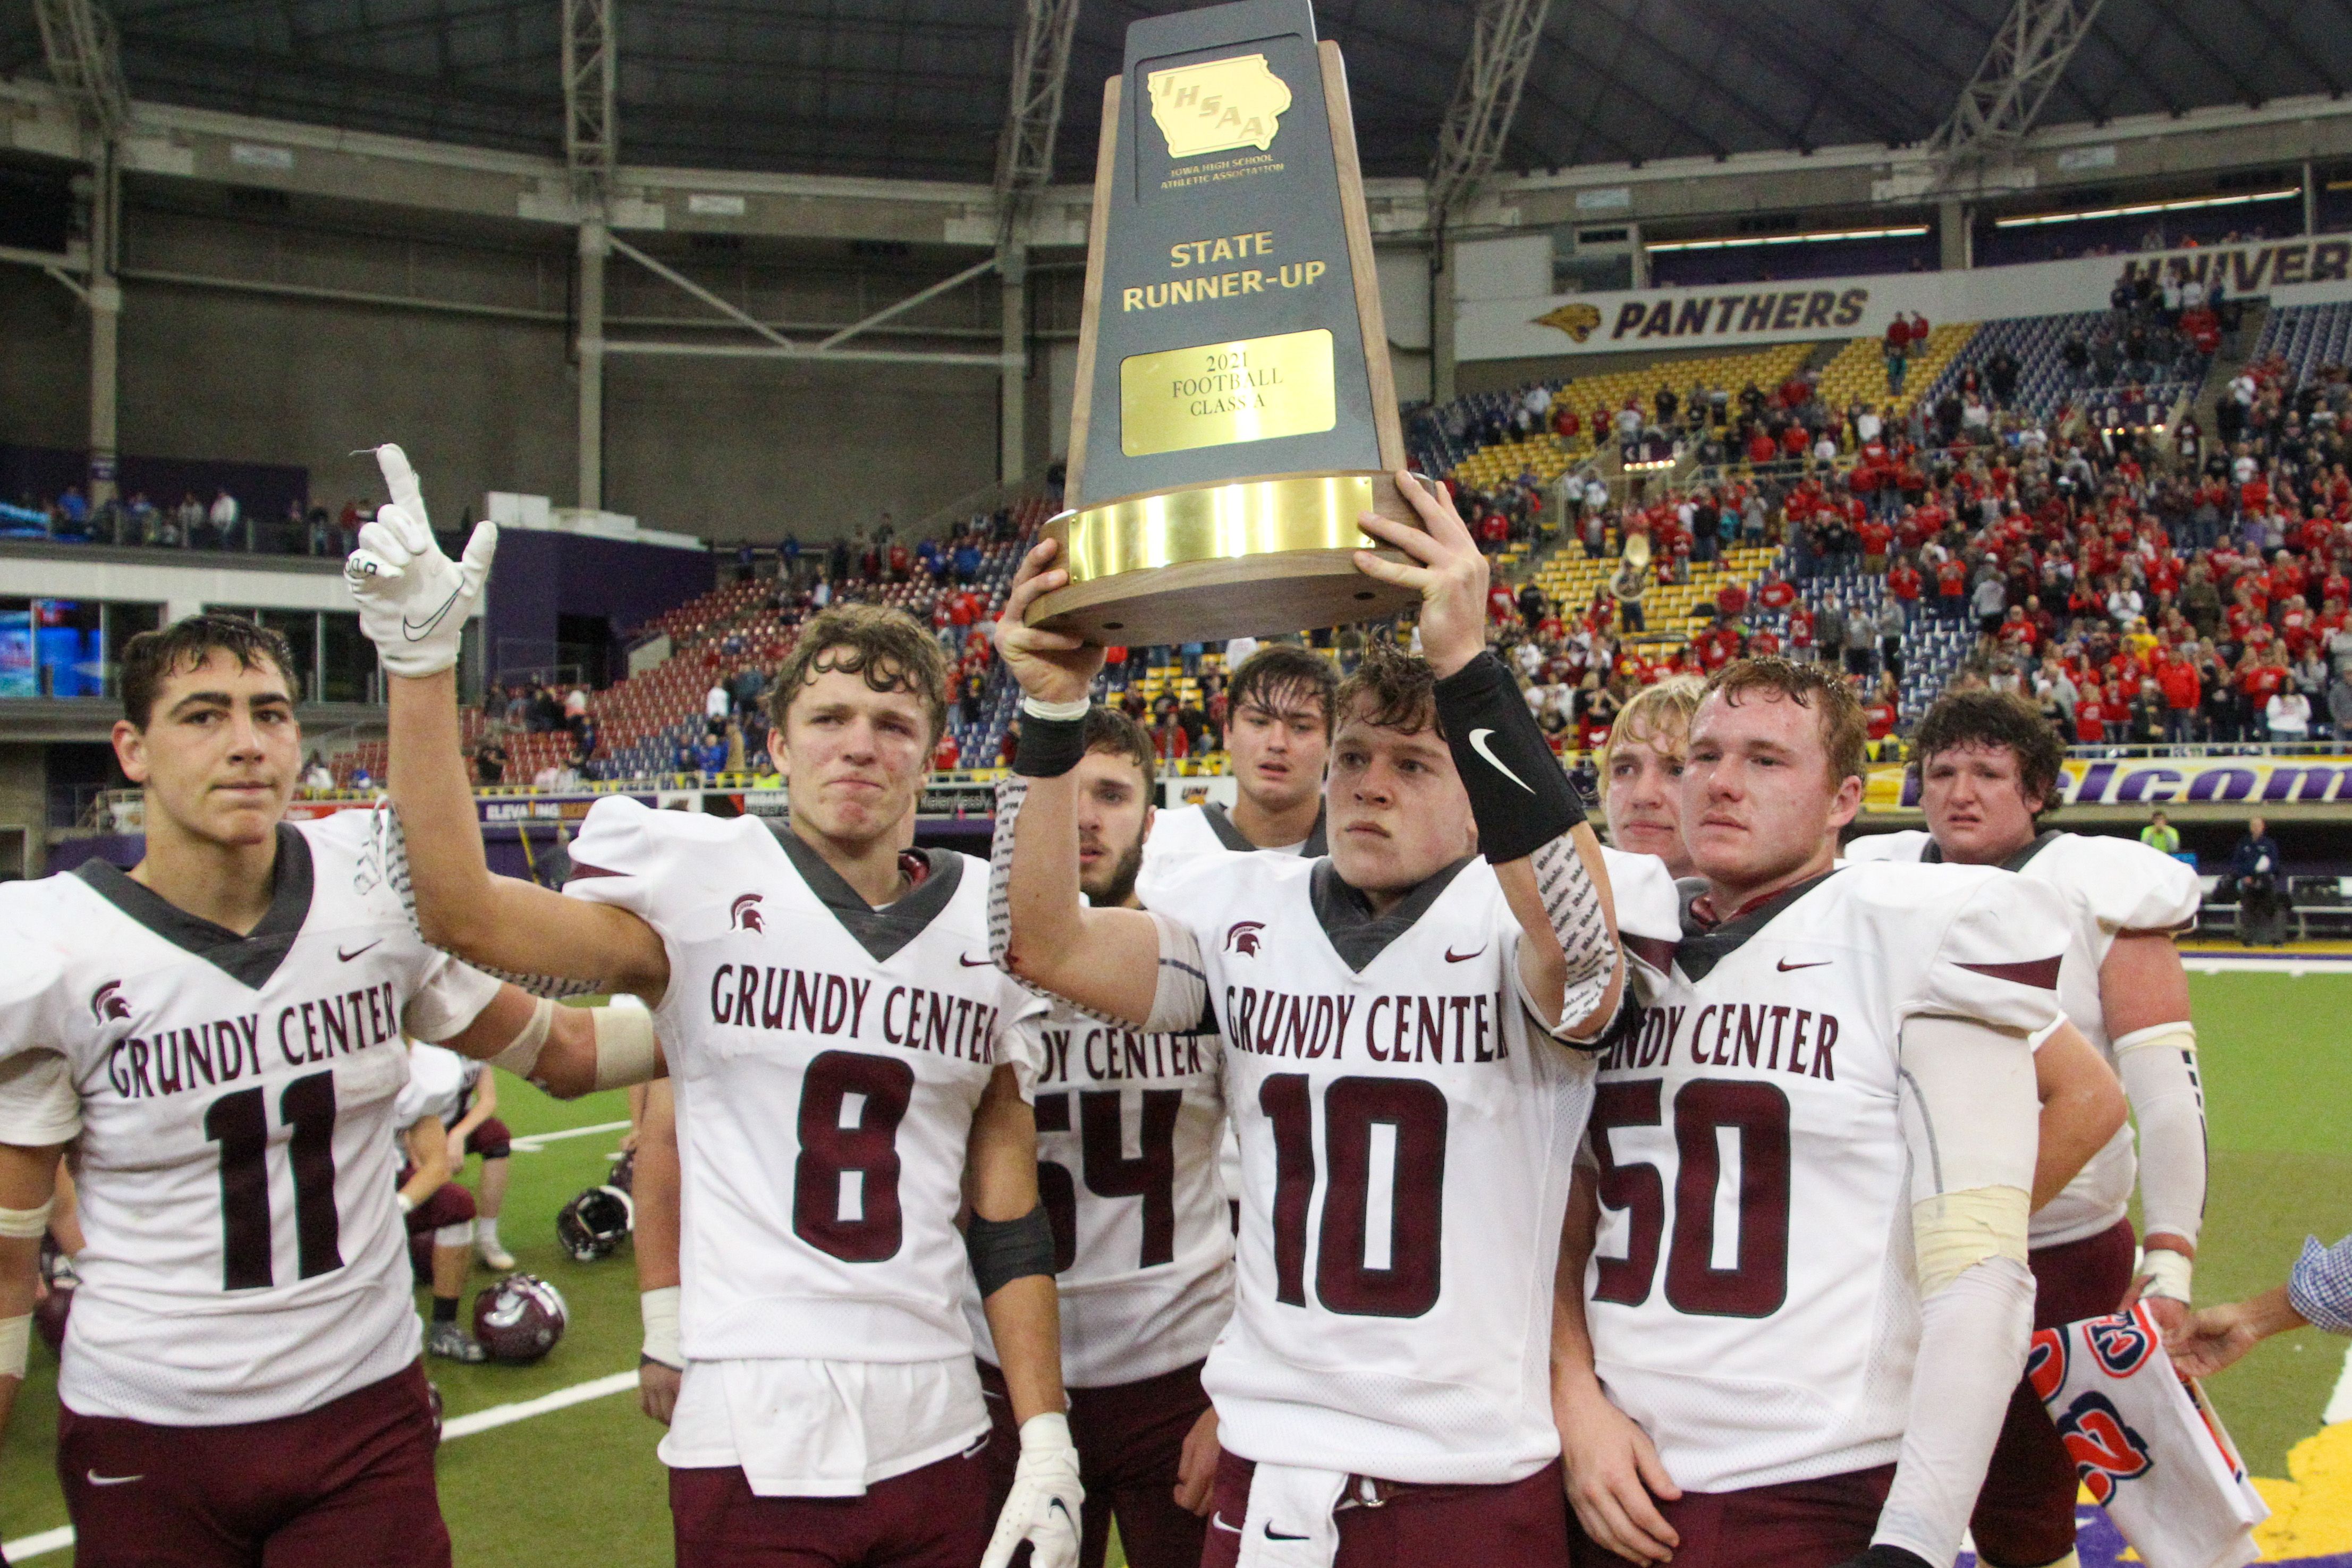 Another exceptional Grundy Center football season ended in heartbreak in the state championship game against West Hancock. The seniors go out as three-time state runners-up. (Jake Ryder photo)